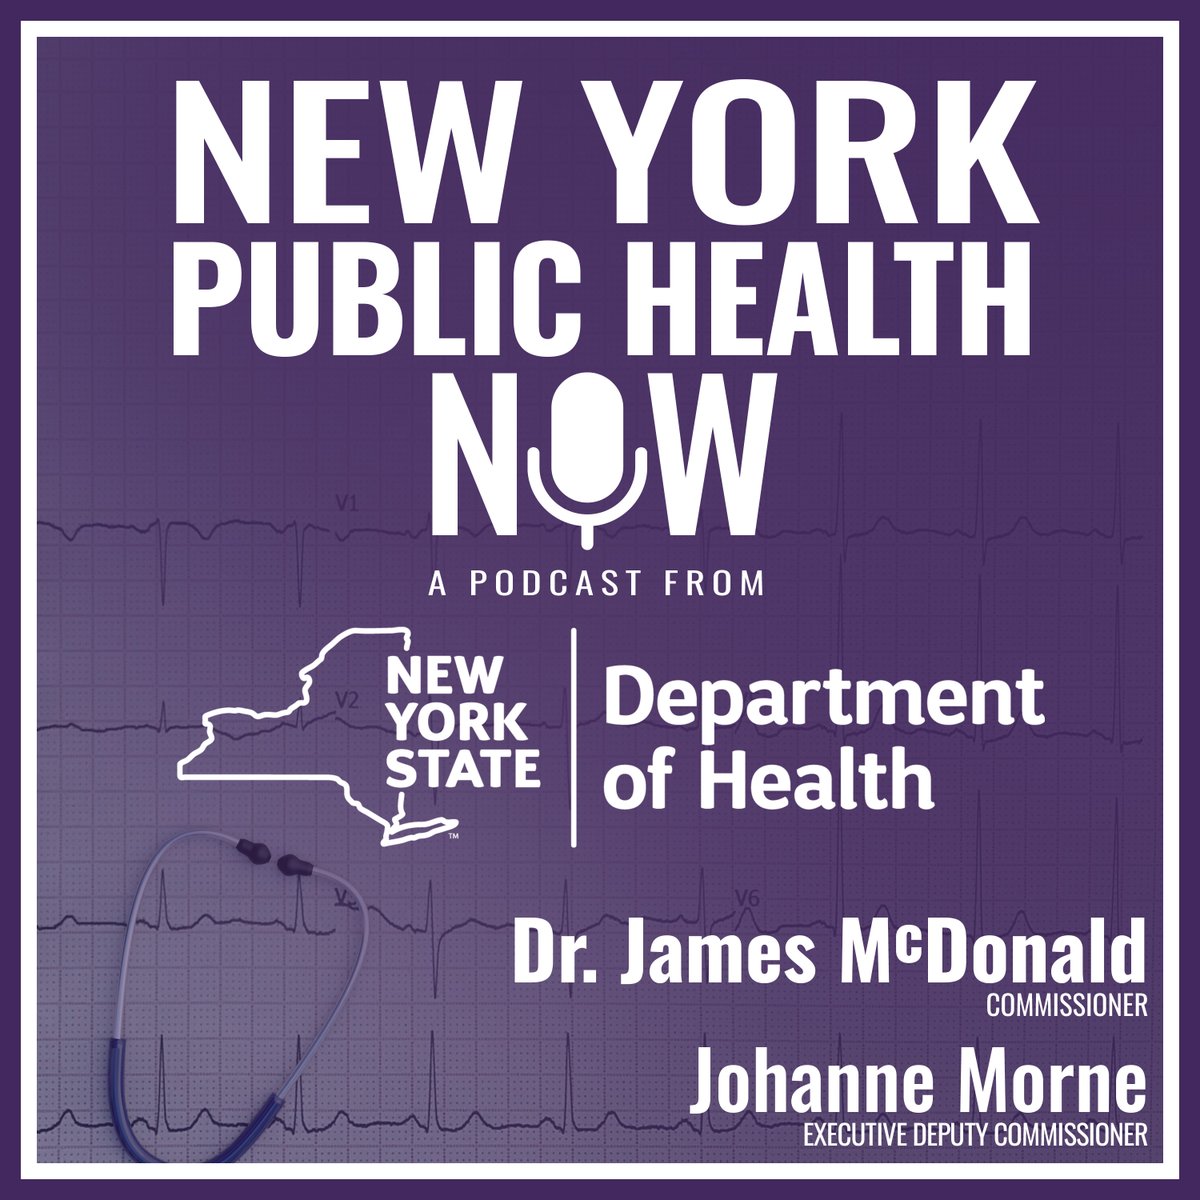 Our new episode explores the State’s standing order for contraception and it’s role in promoting health equity and women’s reproductive rights. Listen on your favorite podcast platform and our website: health.ny.gov/podcast